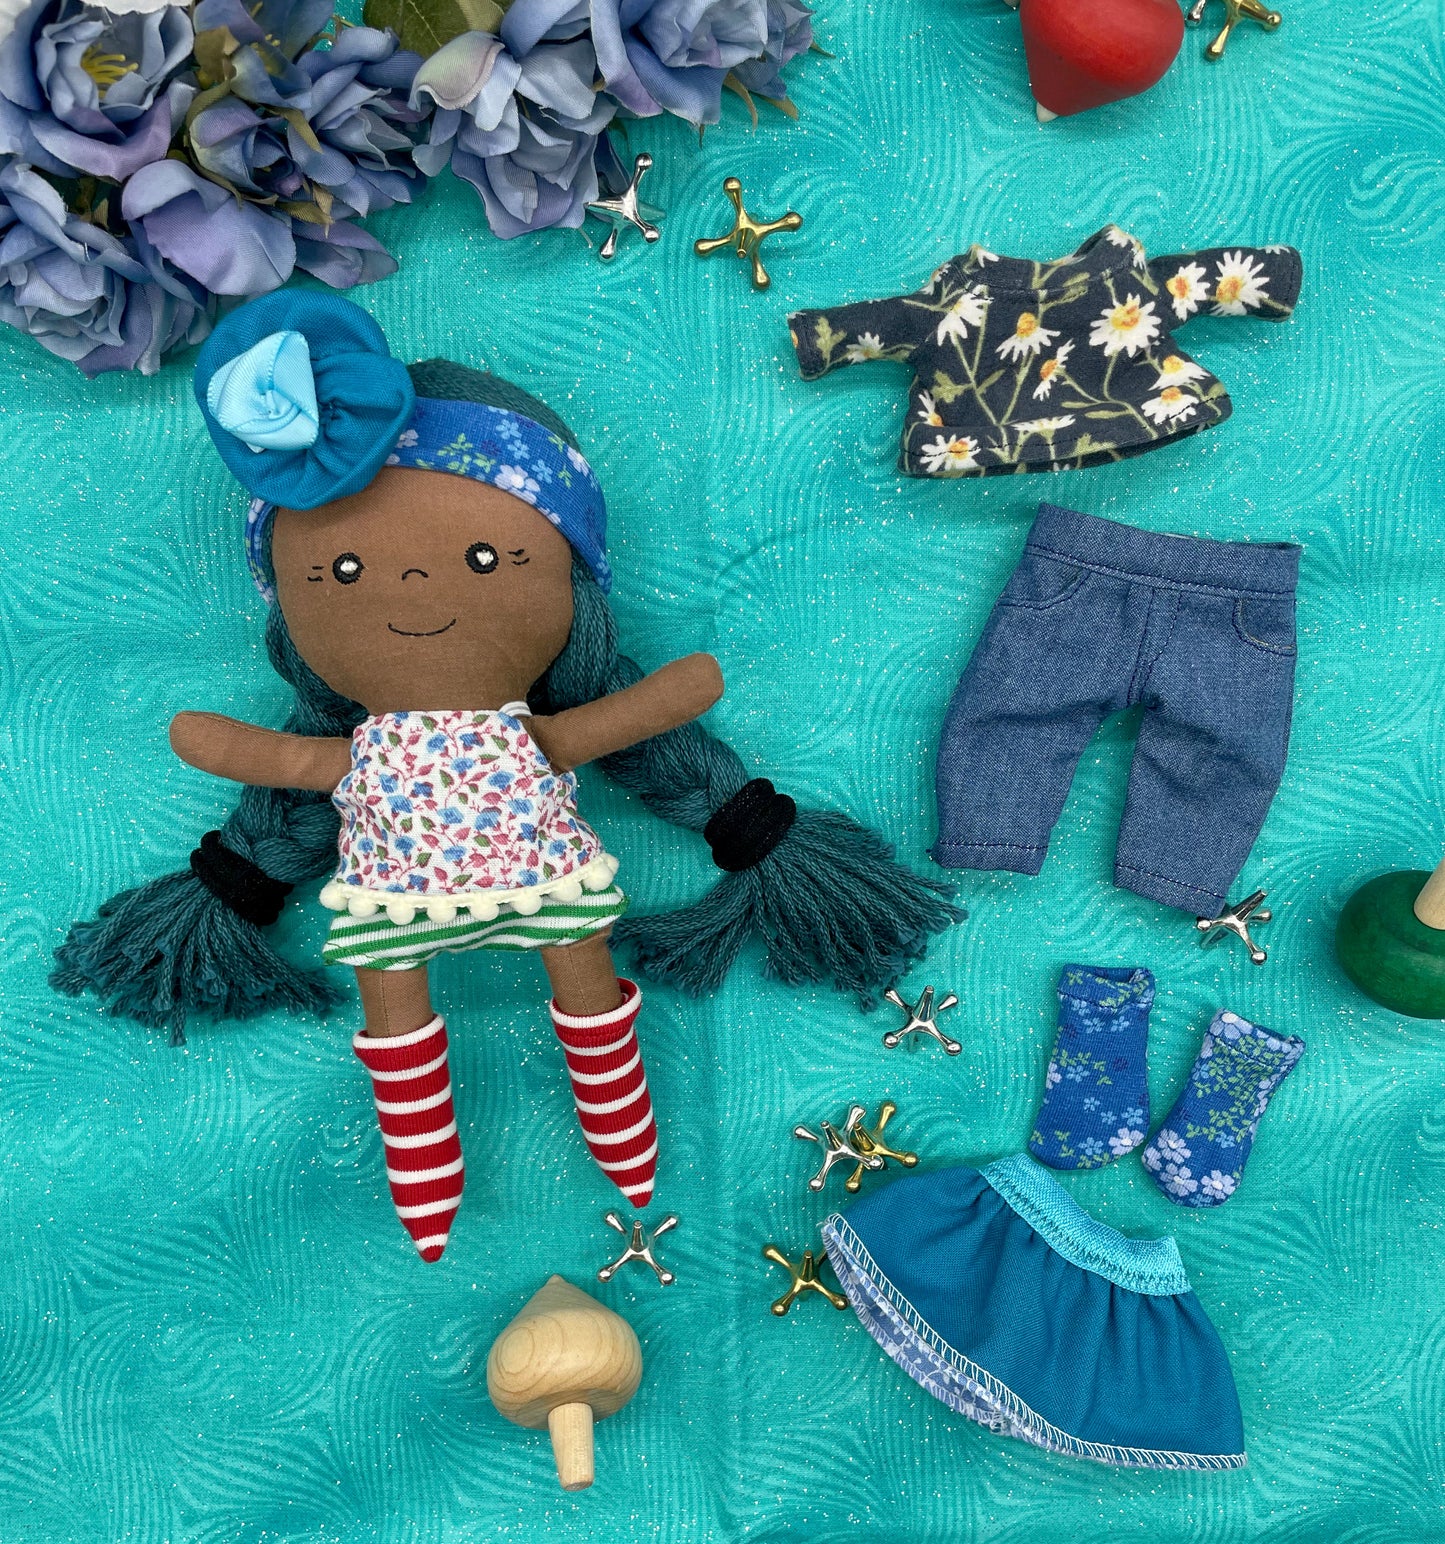 Small Handmade Doll with extra clothes, handmade, Blue hair, Accessories included, Gift, Diverse, heirloom, doll set, skirt, reversible